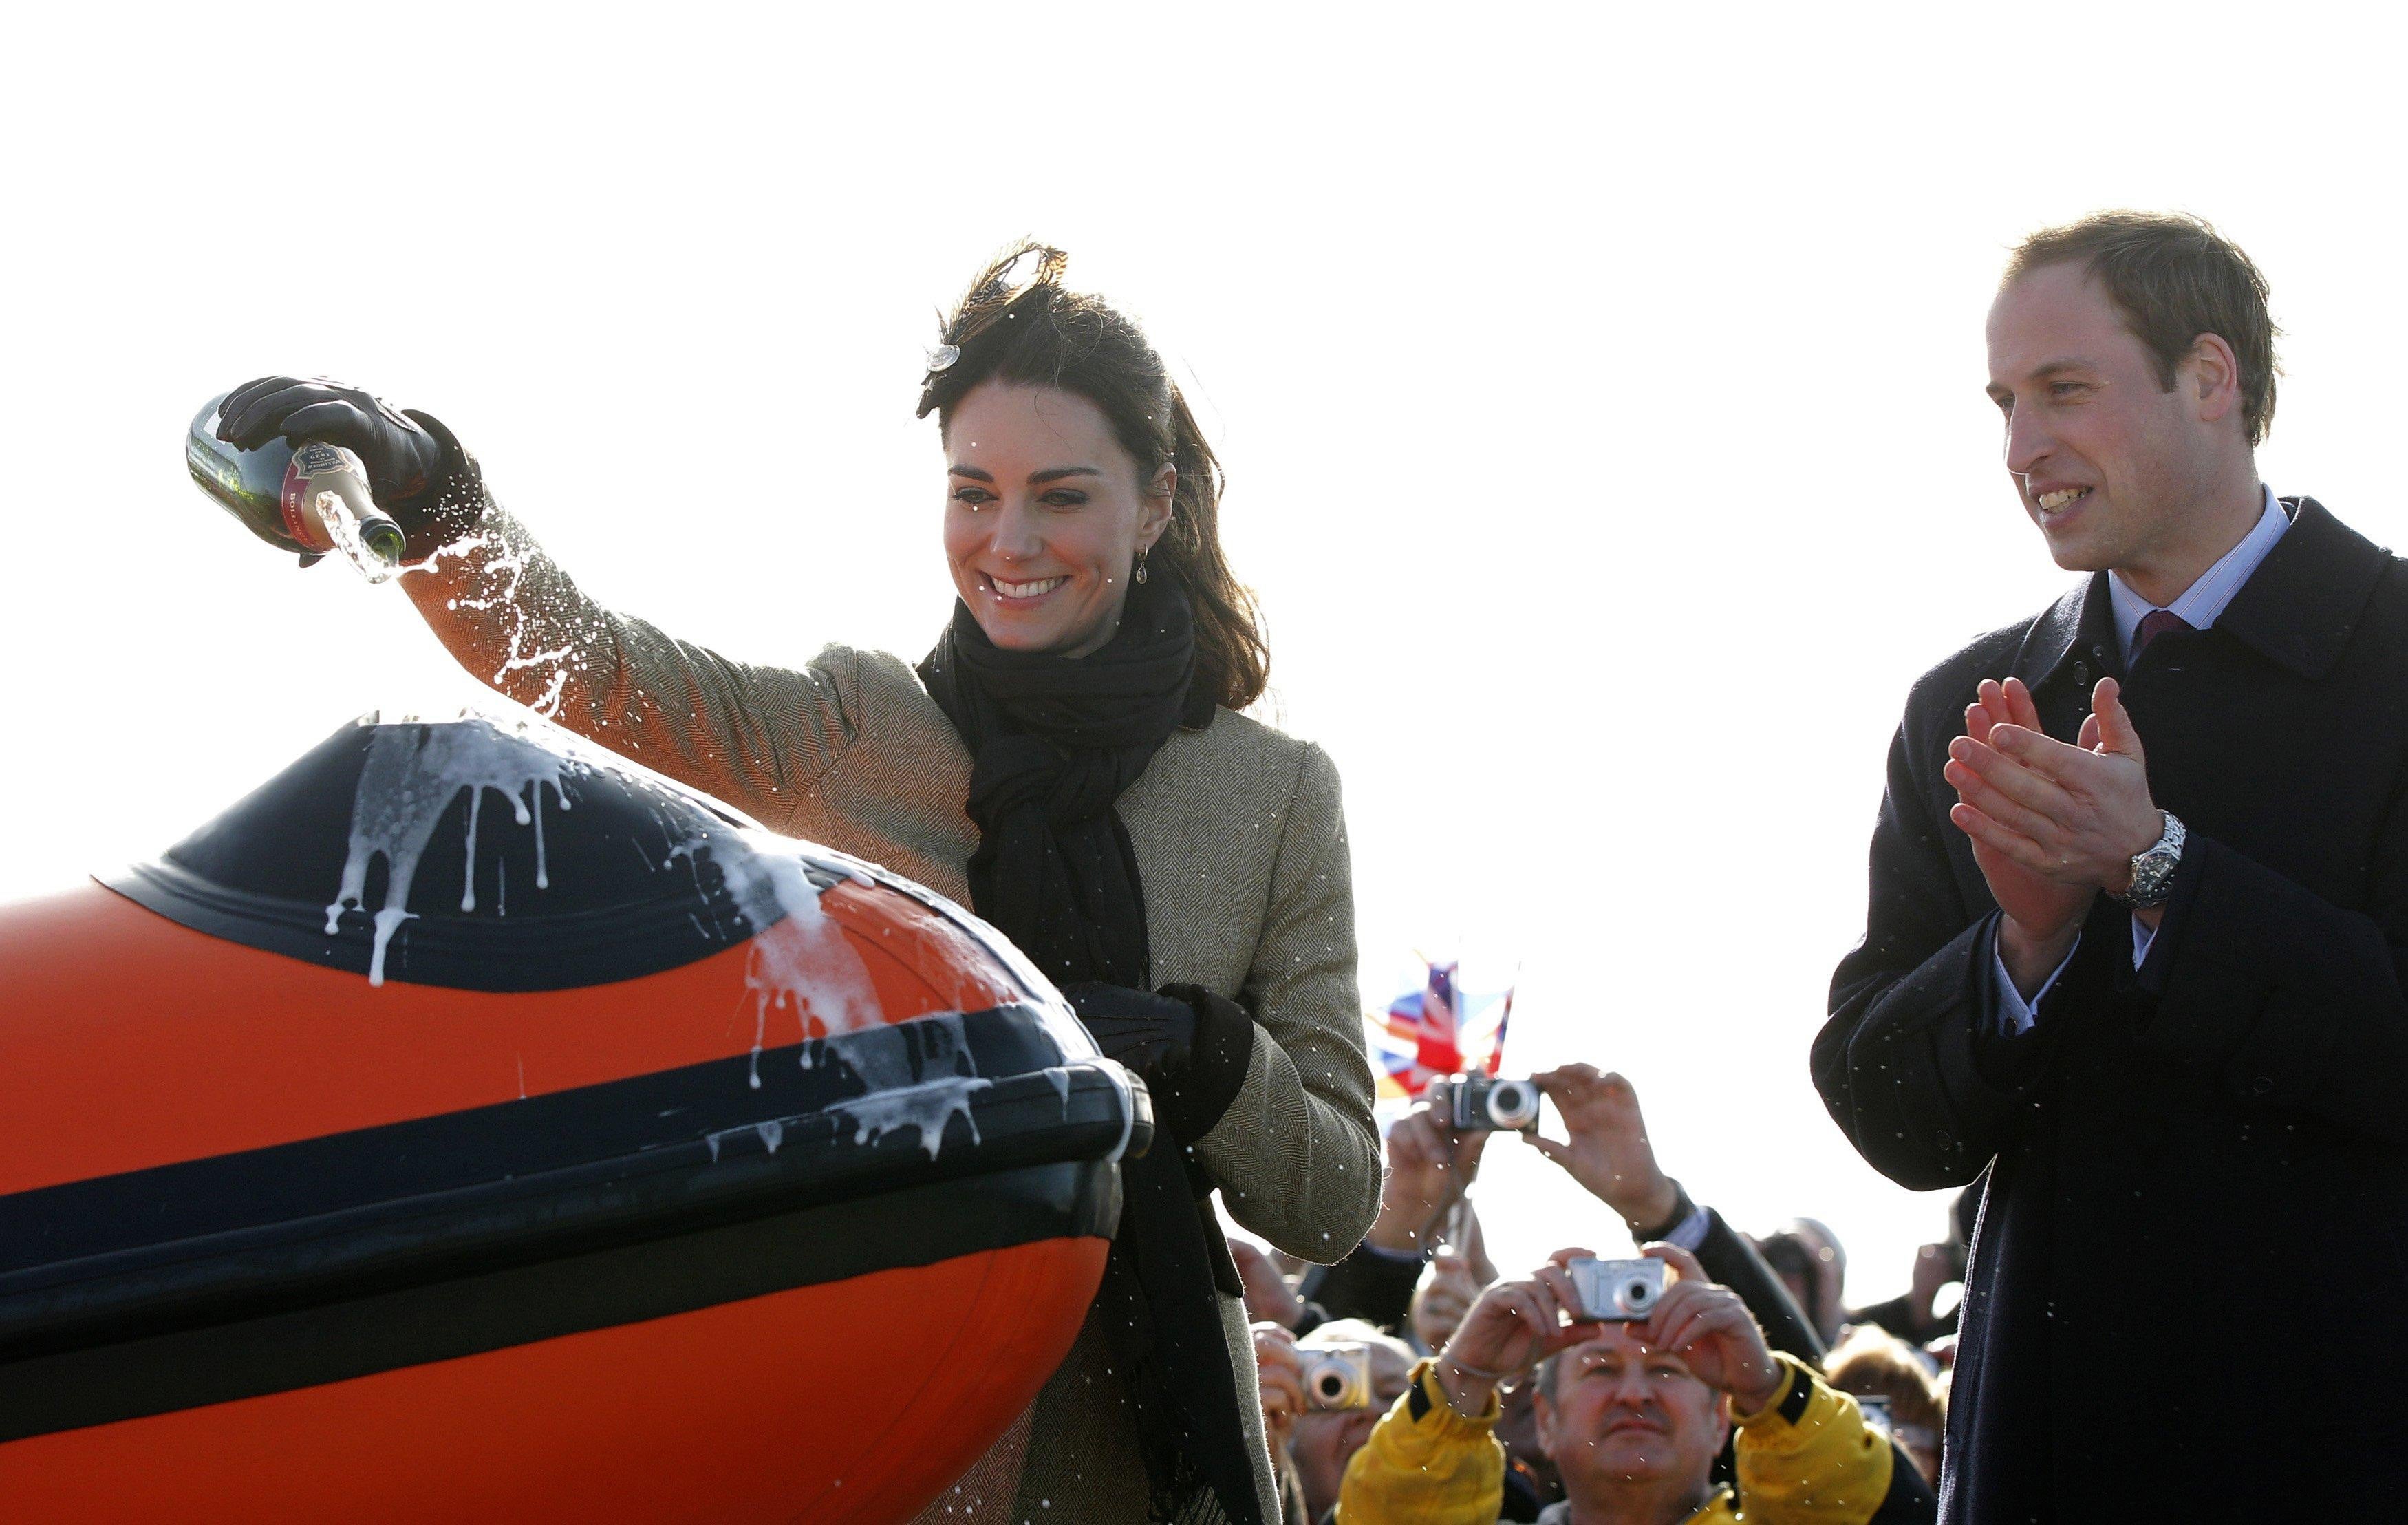 William watches fiancee Kate pour champagne at Trearddur Bay Lifeboat Station on Anglesey in 2011 ahead of their wedding (Phil Noble/PA)